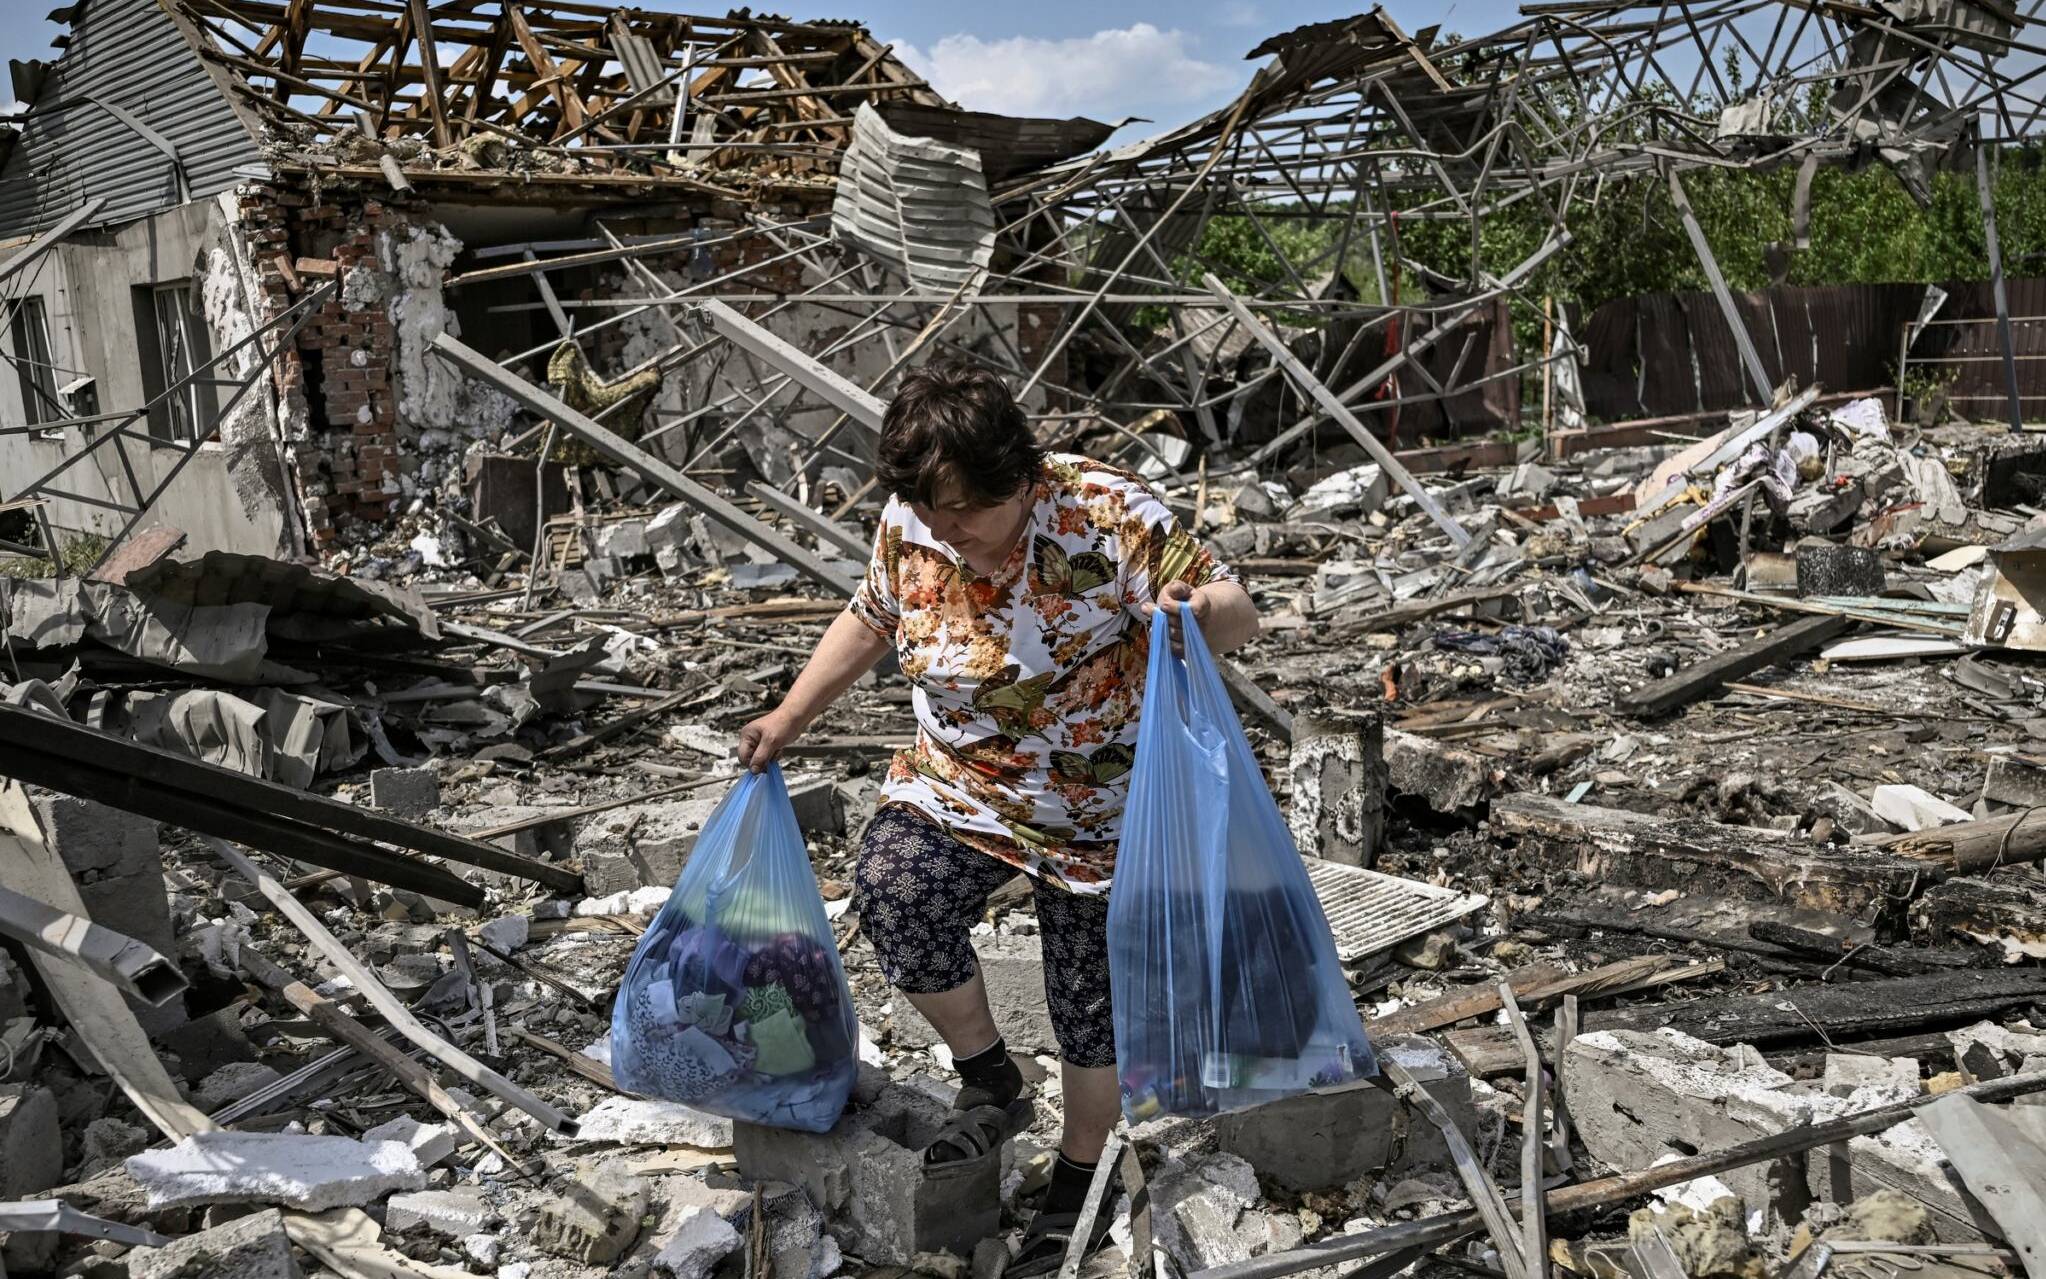 A woman collects belongings in the ruble of their house after a strike destoyed three houses in the city of Slovyansk in the eastern Ukrainian region of Donbas on June 1, 2022. (Photo by ARIS MESSINIS / AFP)